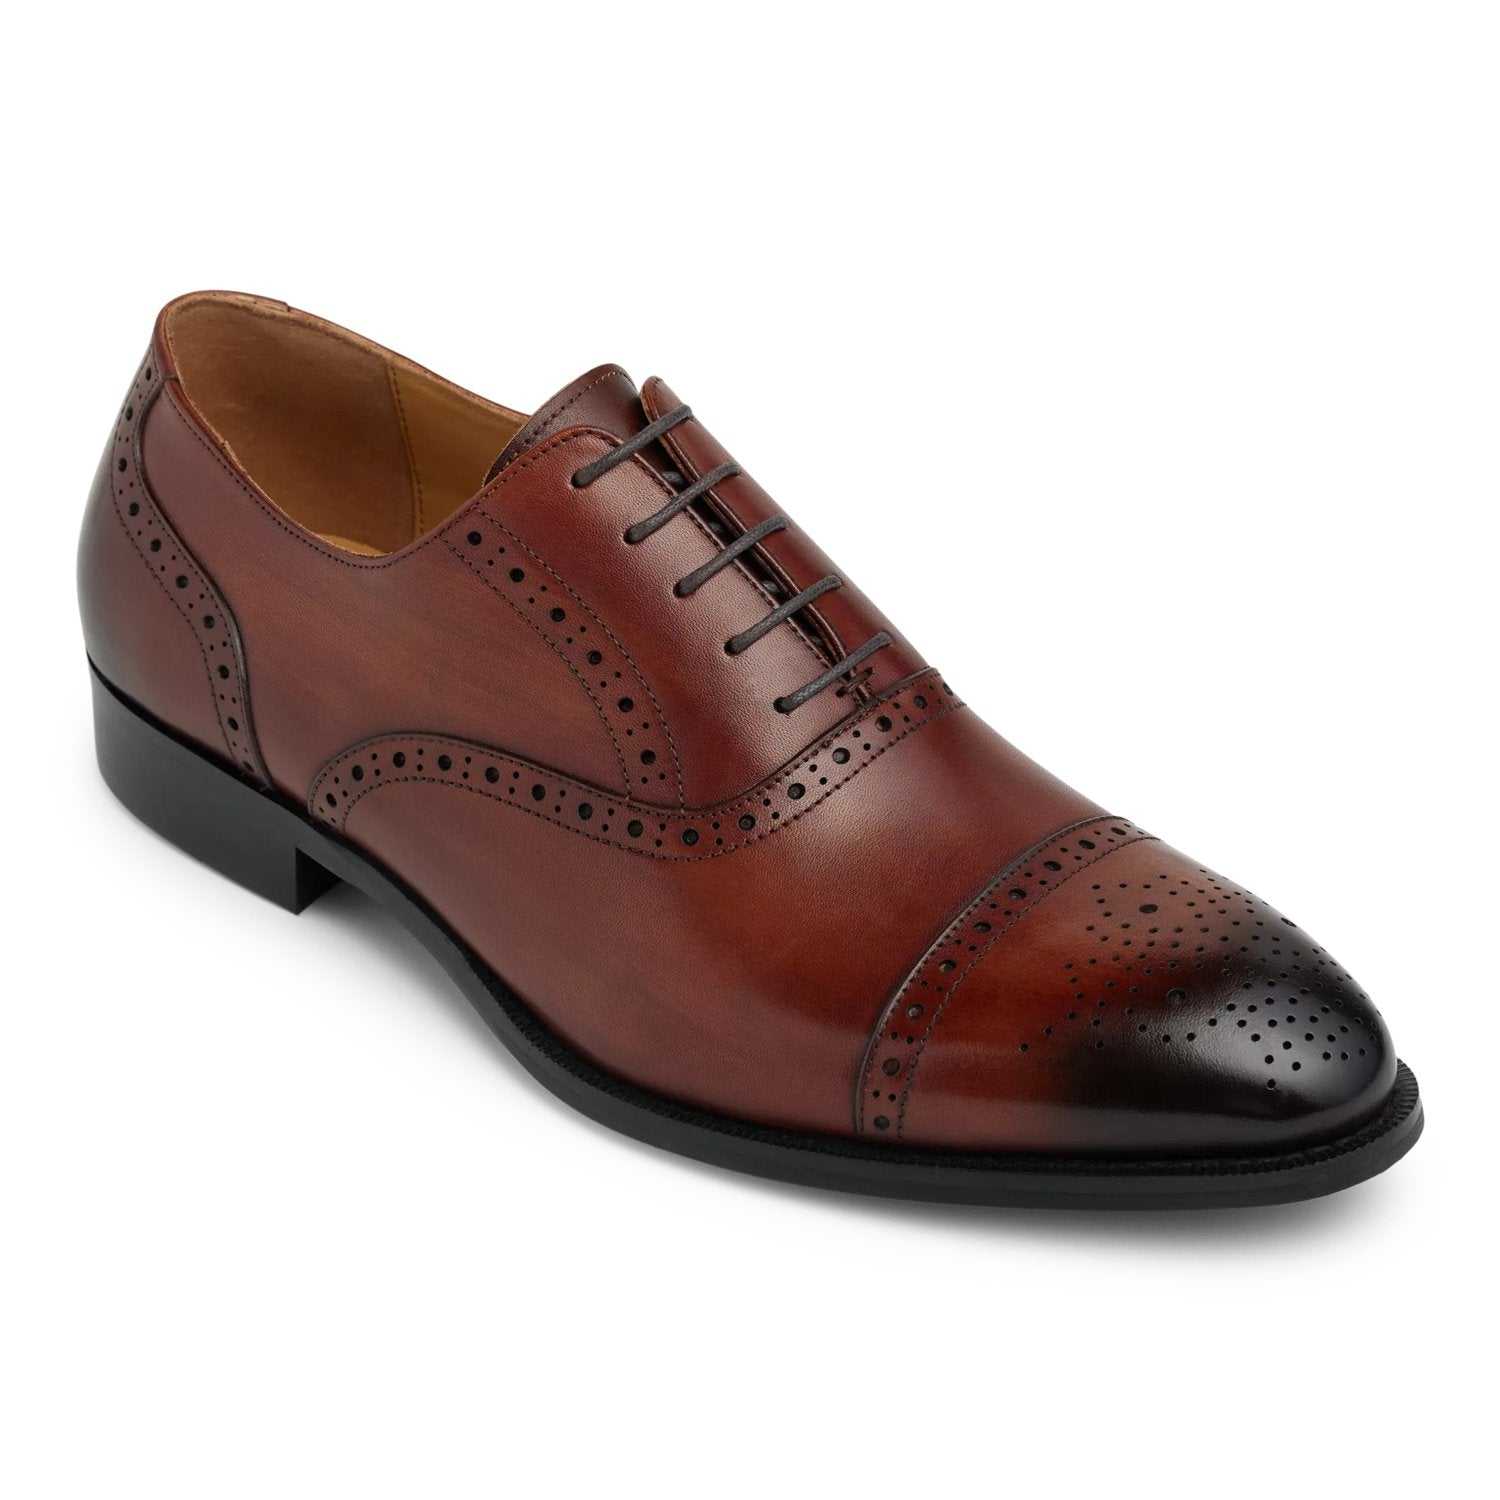 Pointed Cap Toe Oxfords